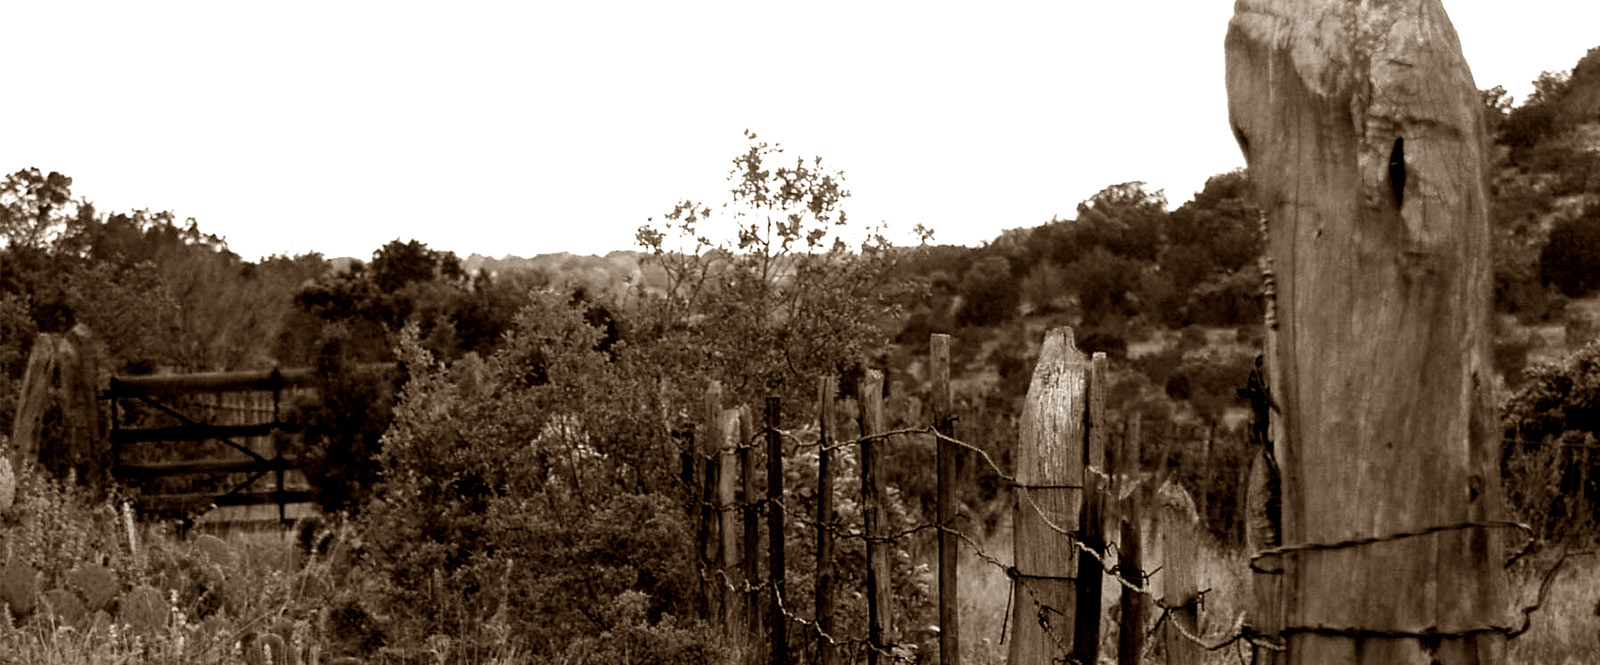 Image of a fence with foliage